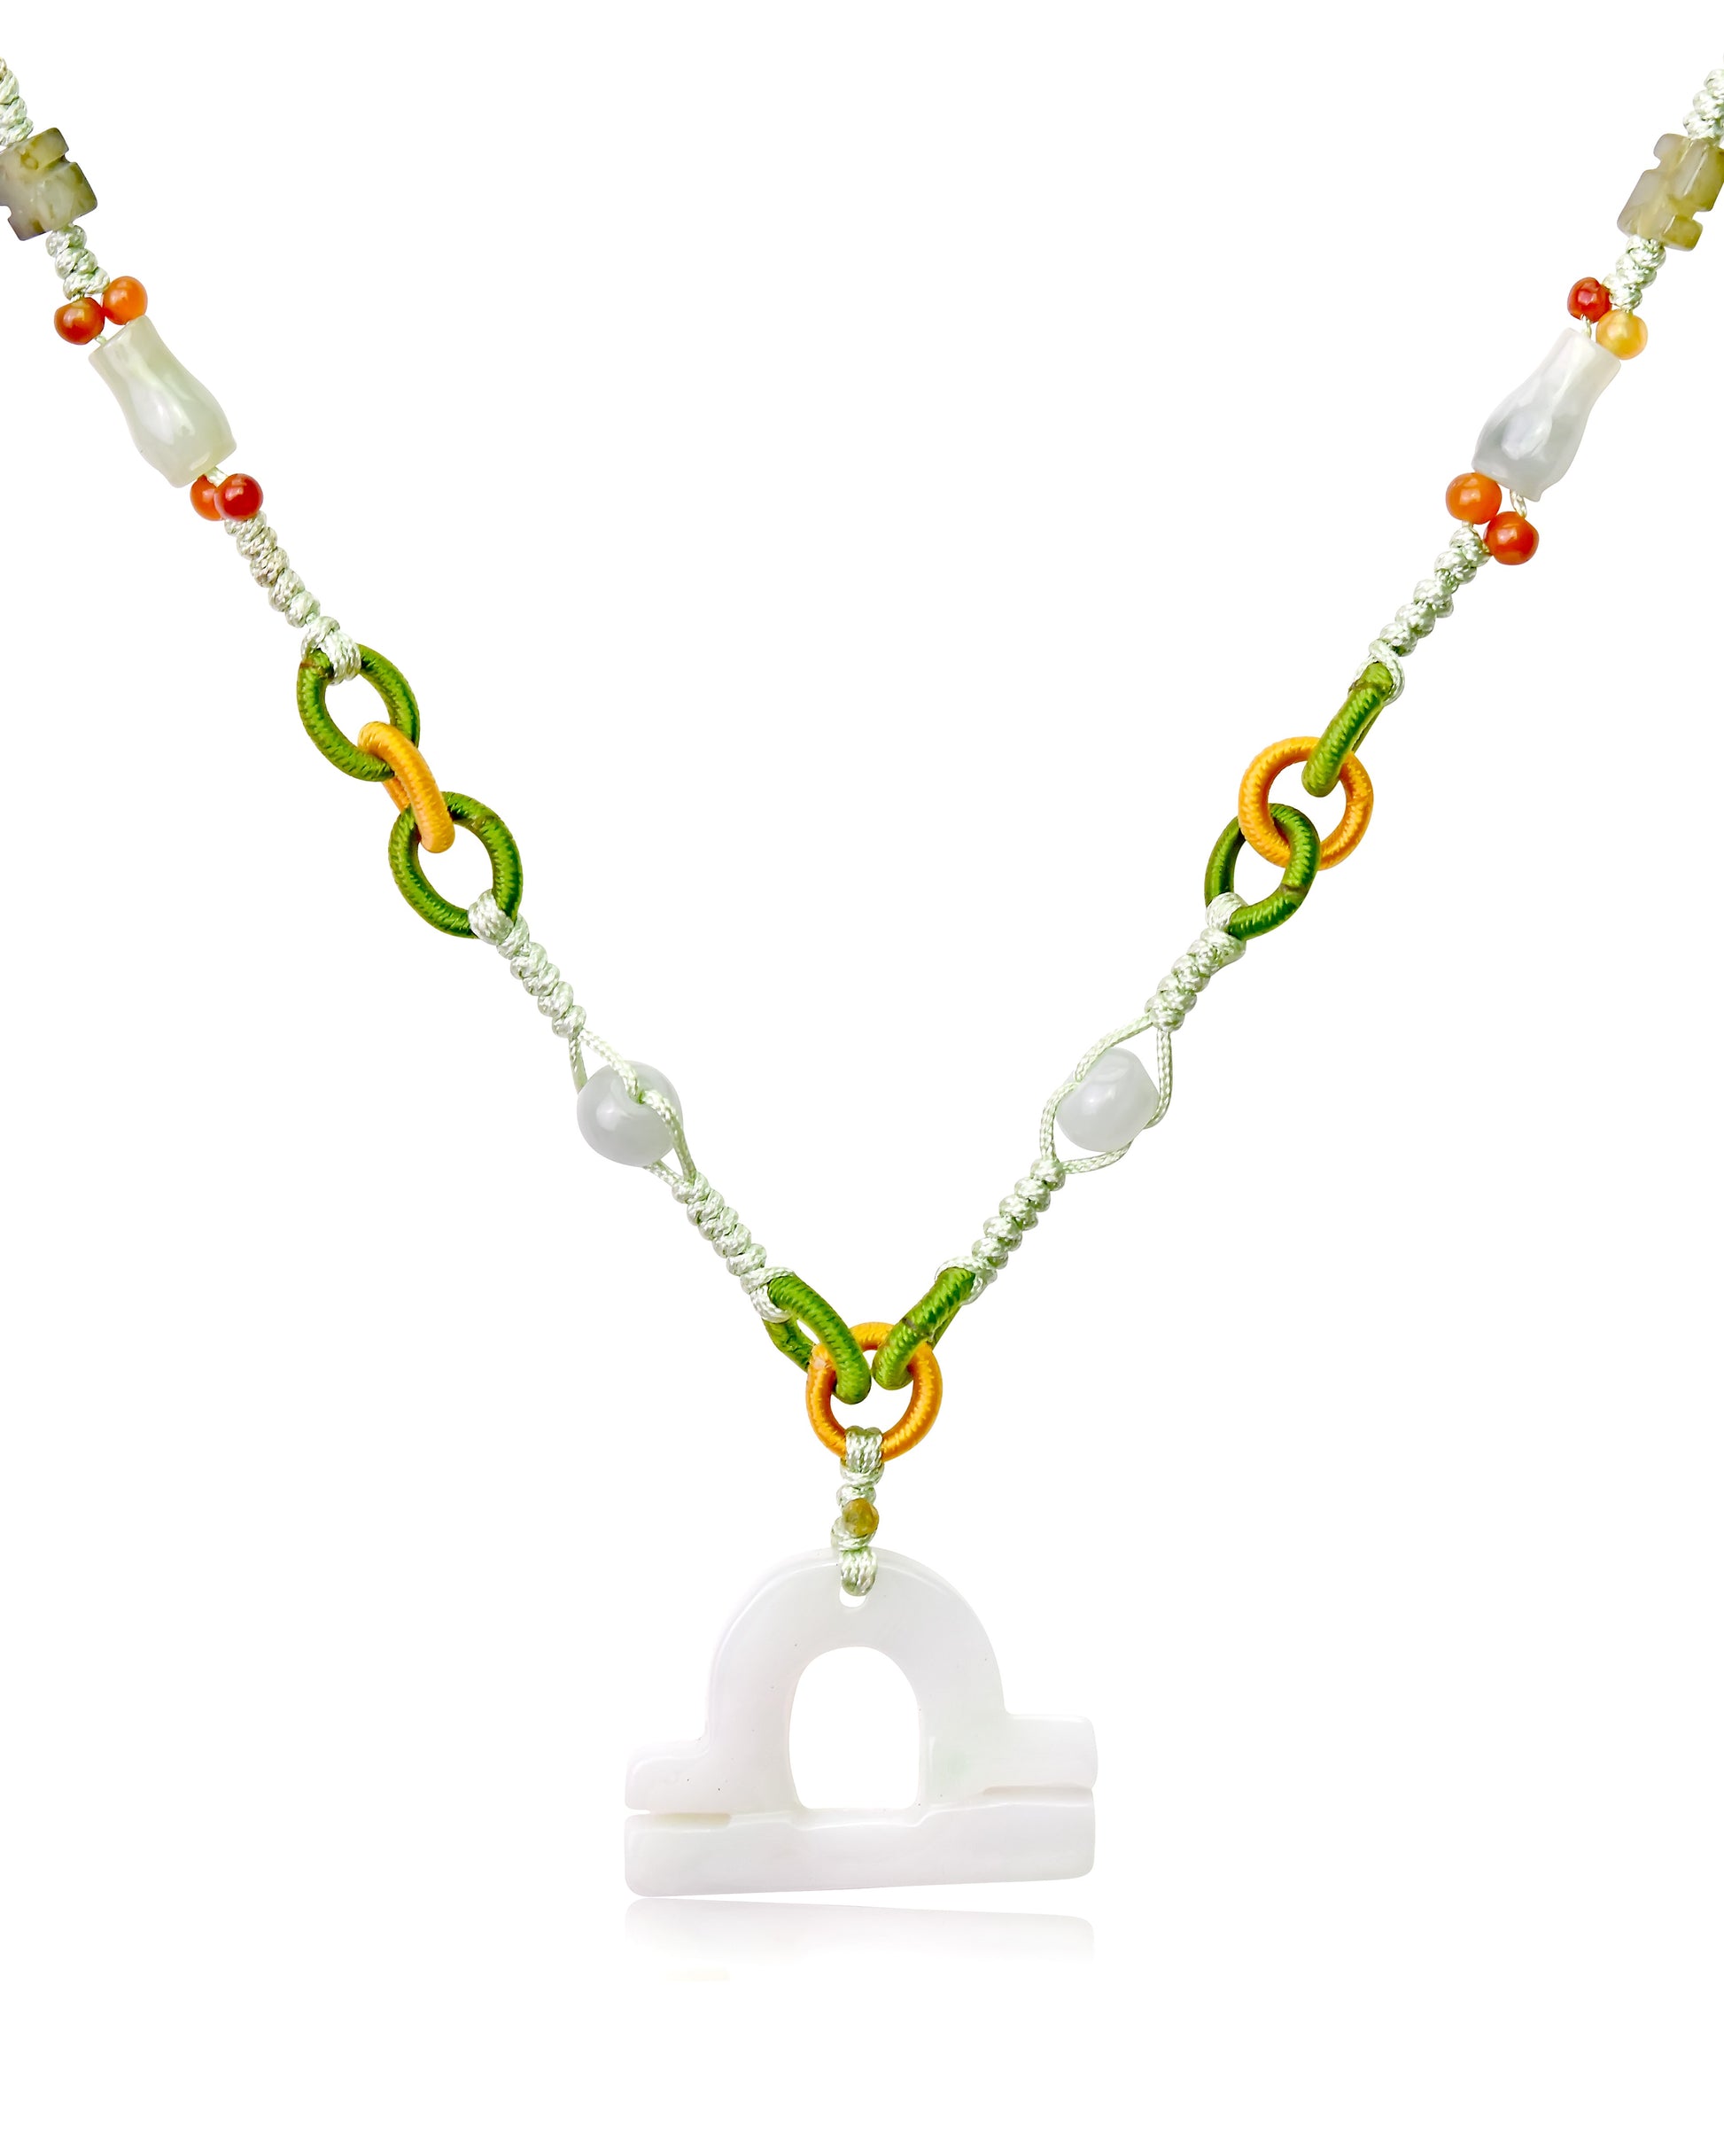 Get the Perfect Get the Perfect Gift for the Libra in Your Life with Jade Necklace made with Sea Green Cord